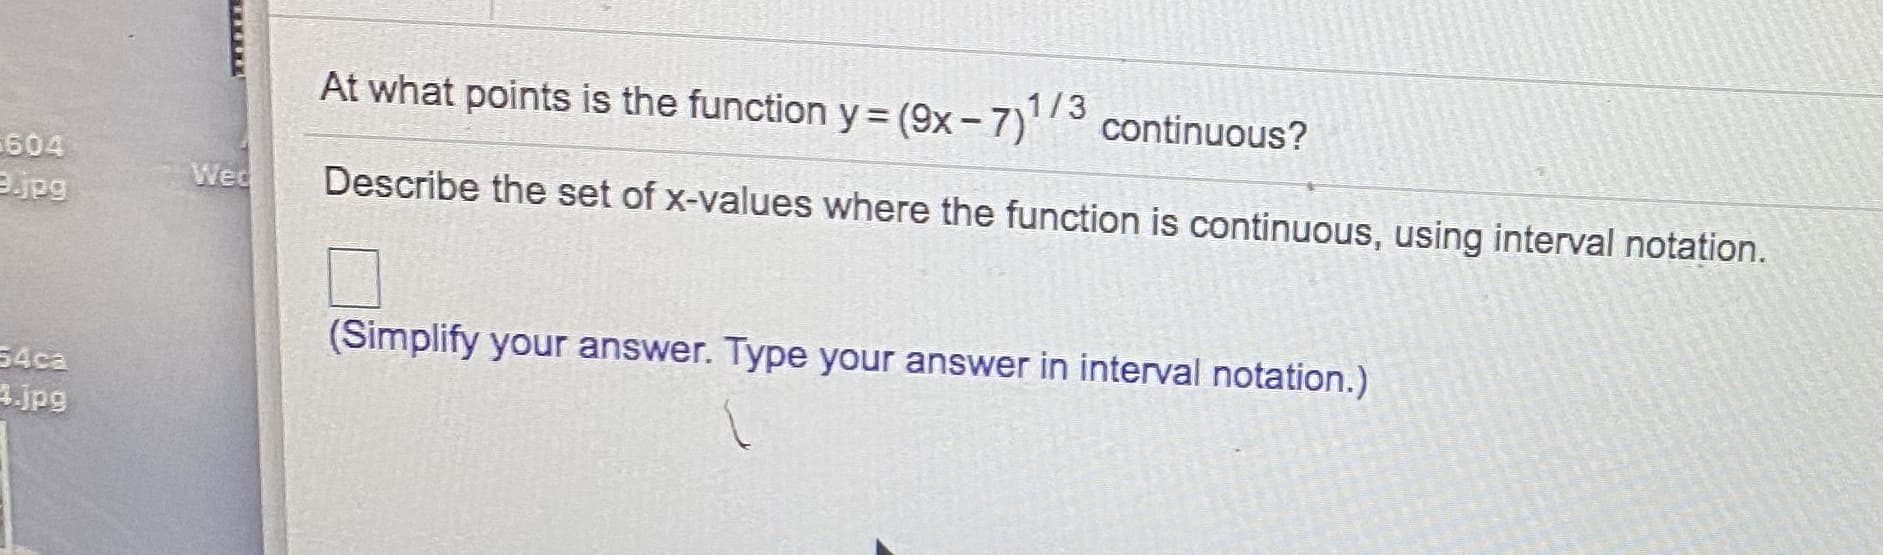 At what points is the function y = (9x-7)' continuous?
1/3
Describe the set of x-values where the function is continuous, using interval notation.
(Simplify your answer. Type your answer in interval notation.)
